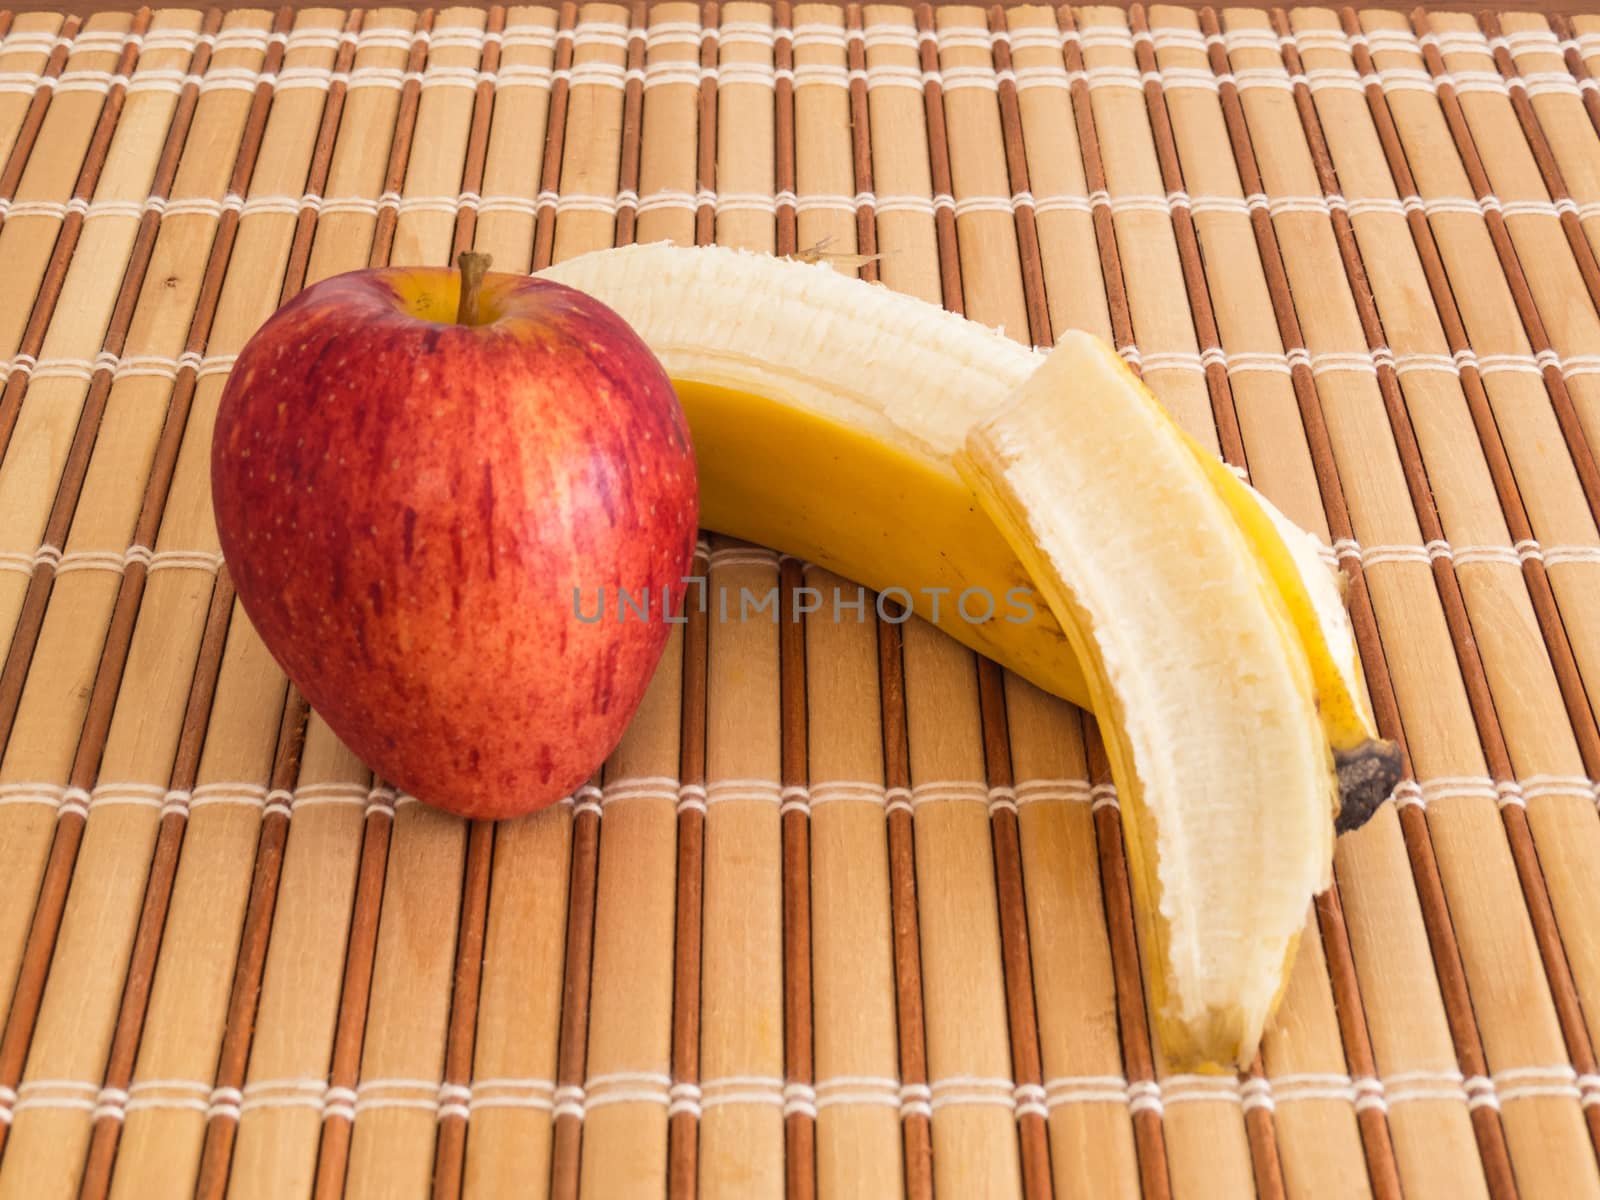 Side view of apple and peeled banana. by silviopl